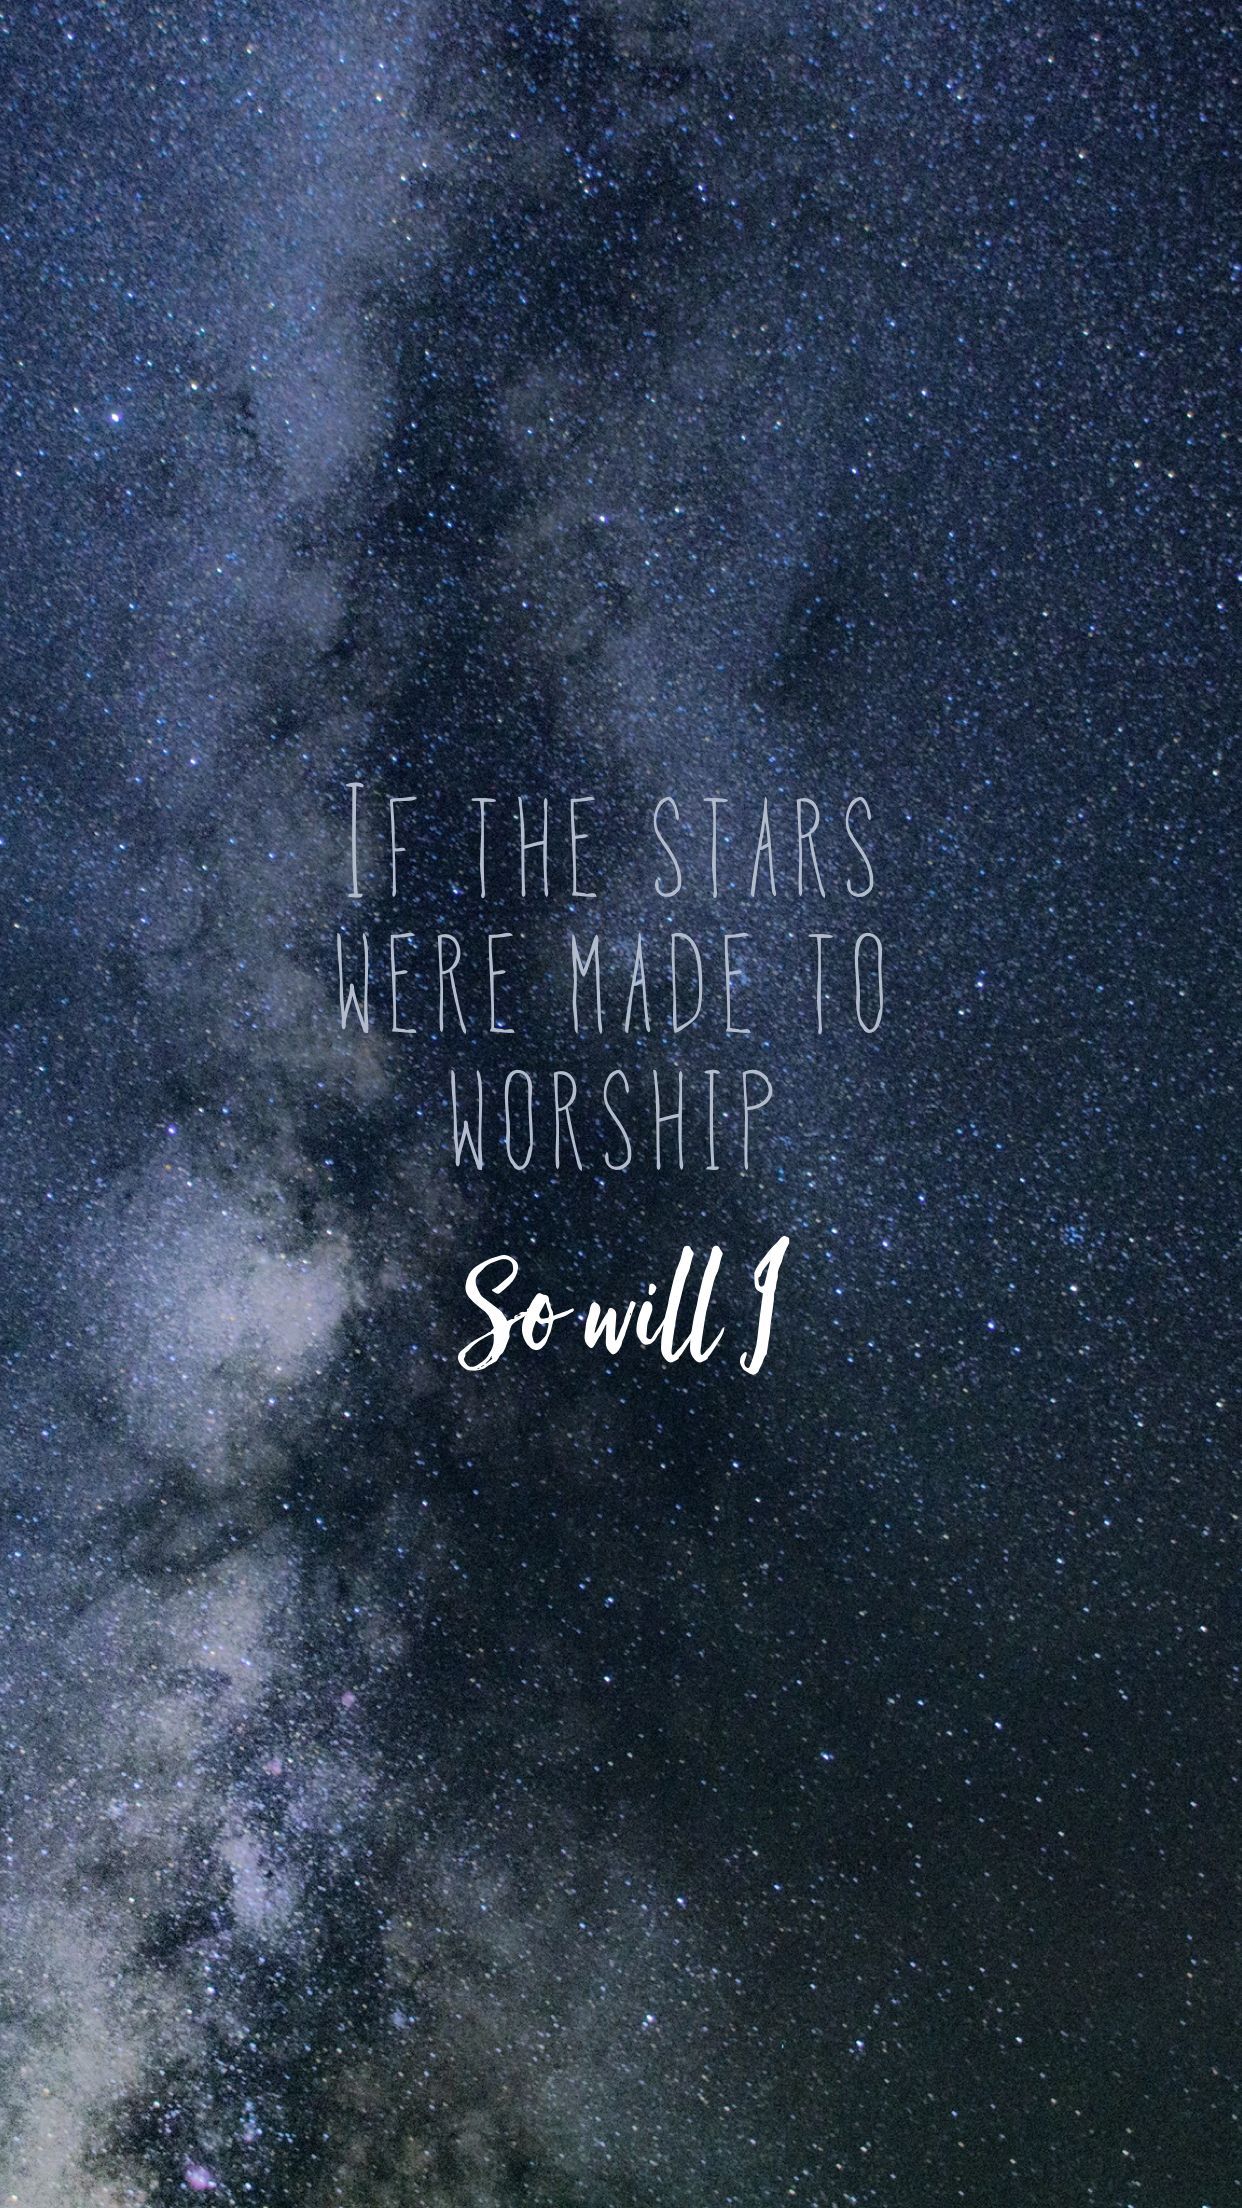 A sky with stars and the words to be made for worship - Christian iPhone